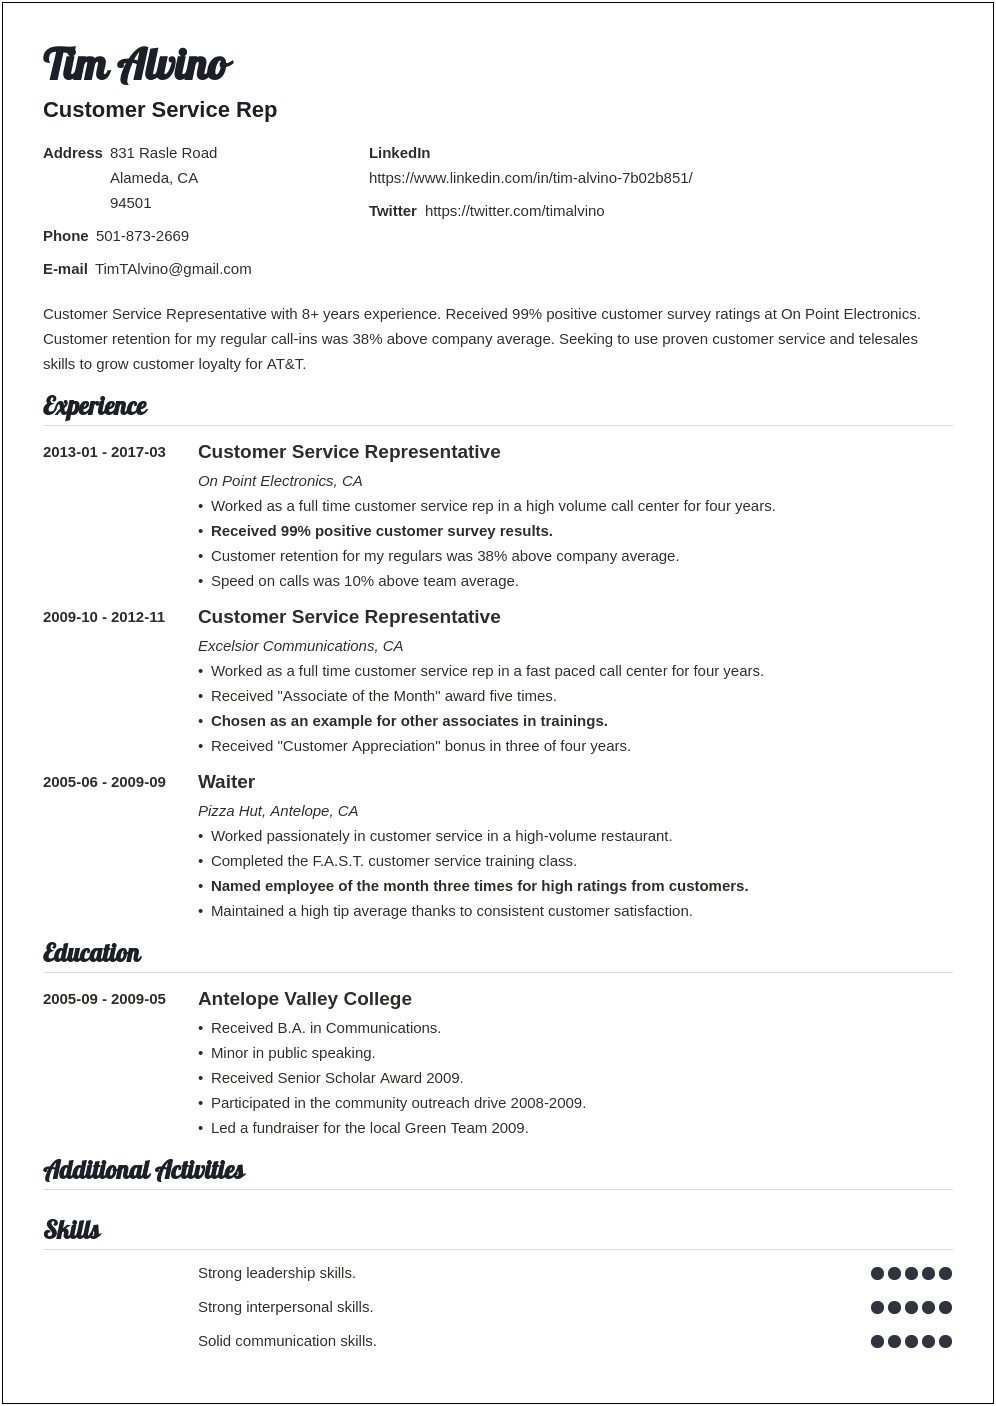 Functional Resume Customer Service Accomplishment Statements Examples